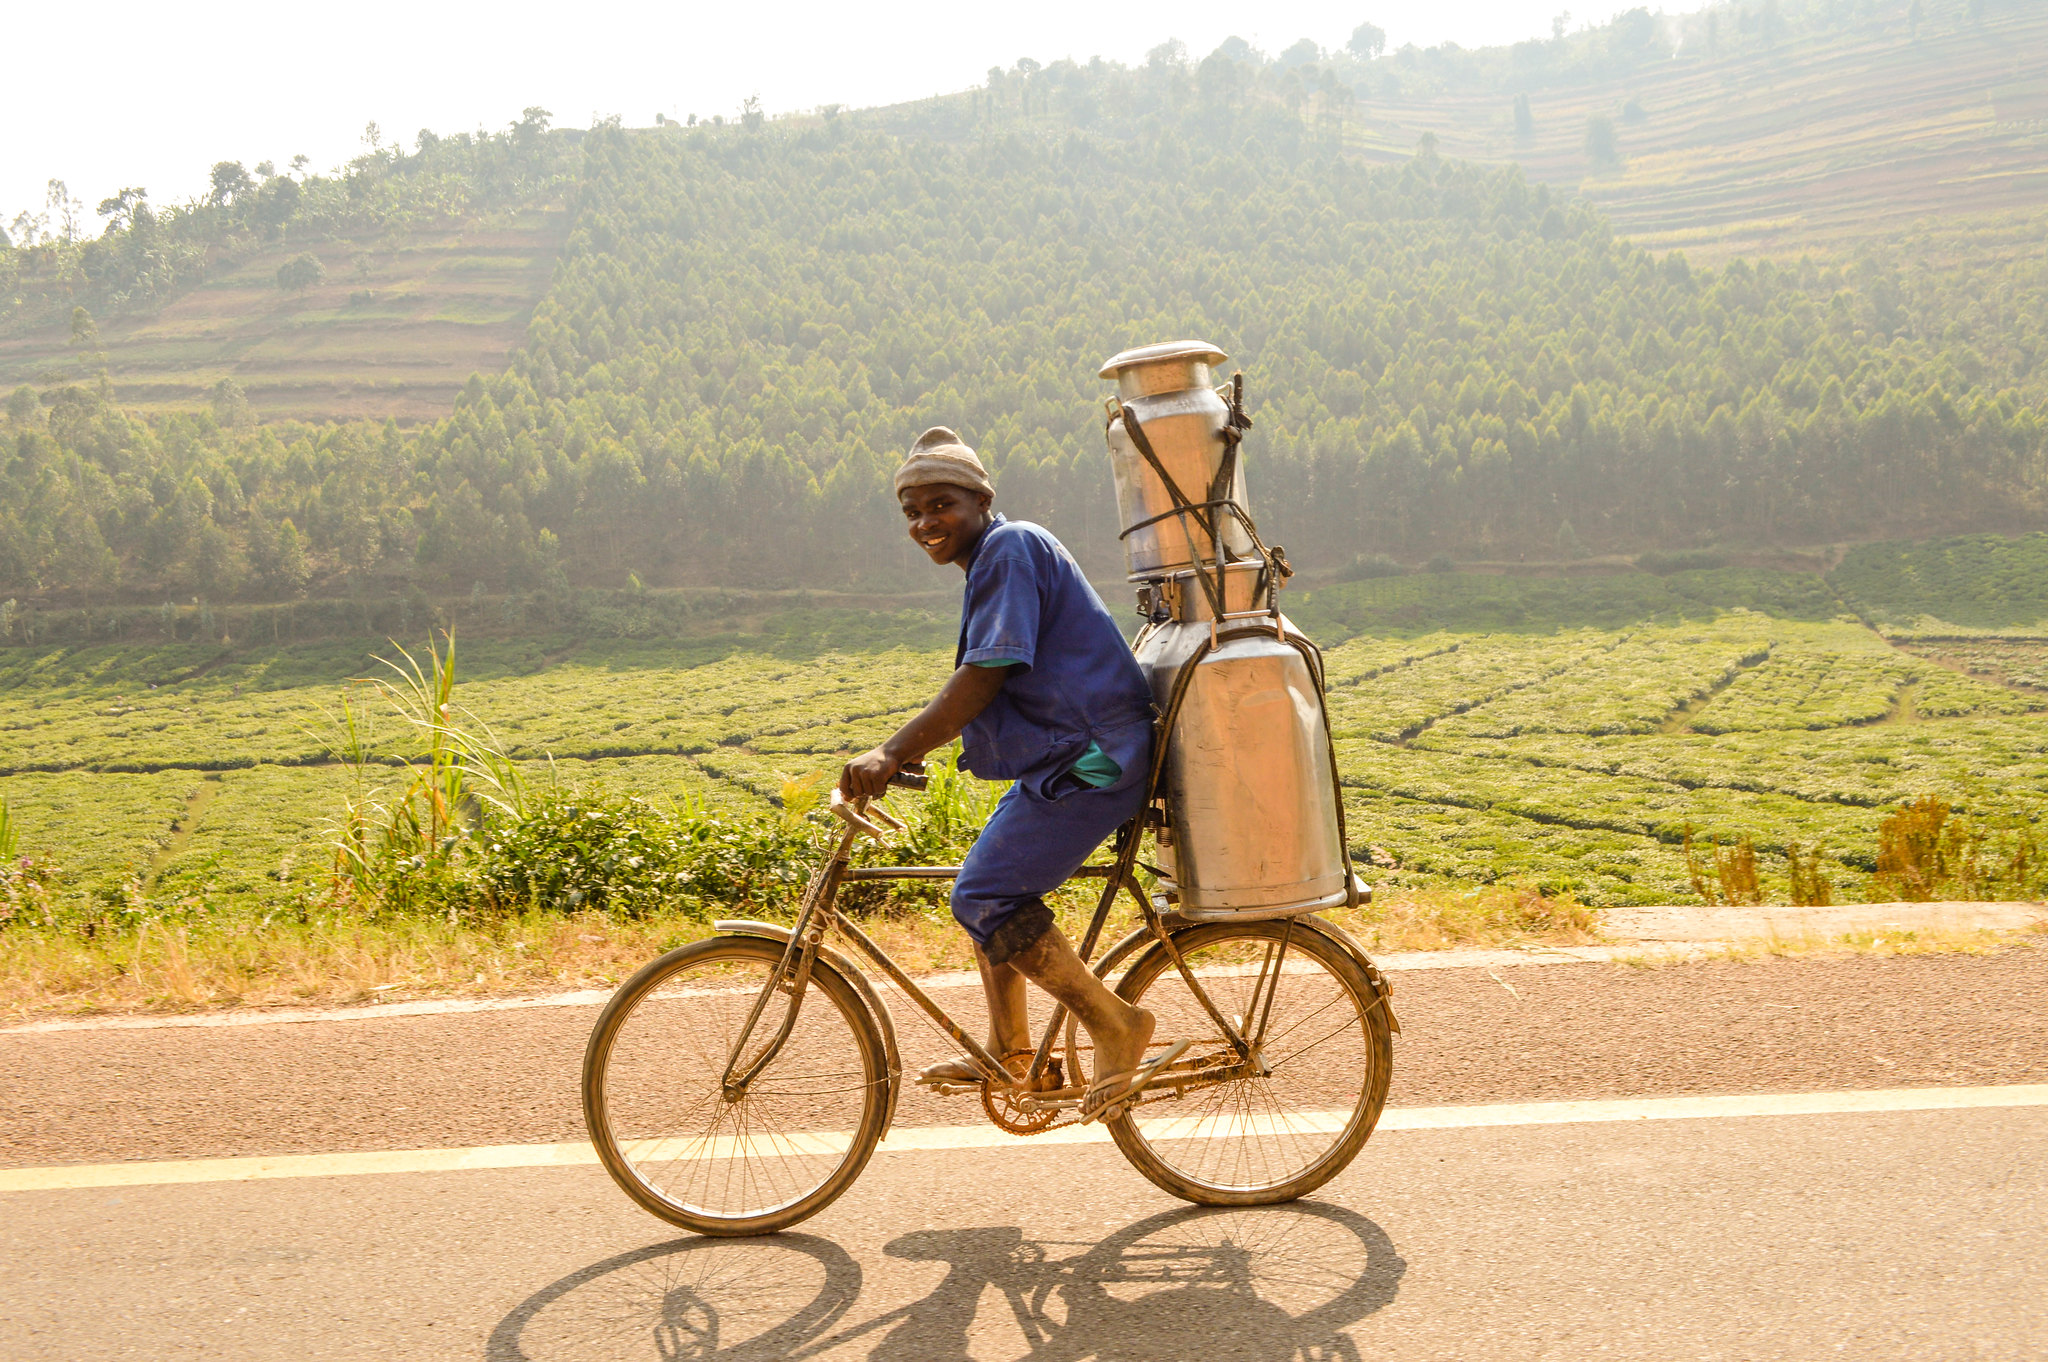 young African man bicycling down a paved road carrying a large container of milk on the back of the bike with hills of farmland in the background